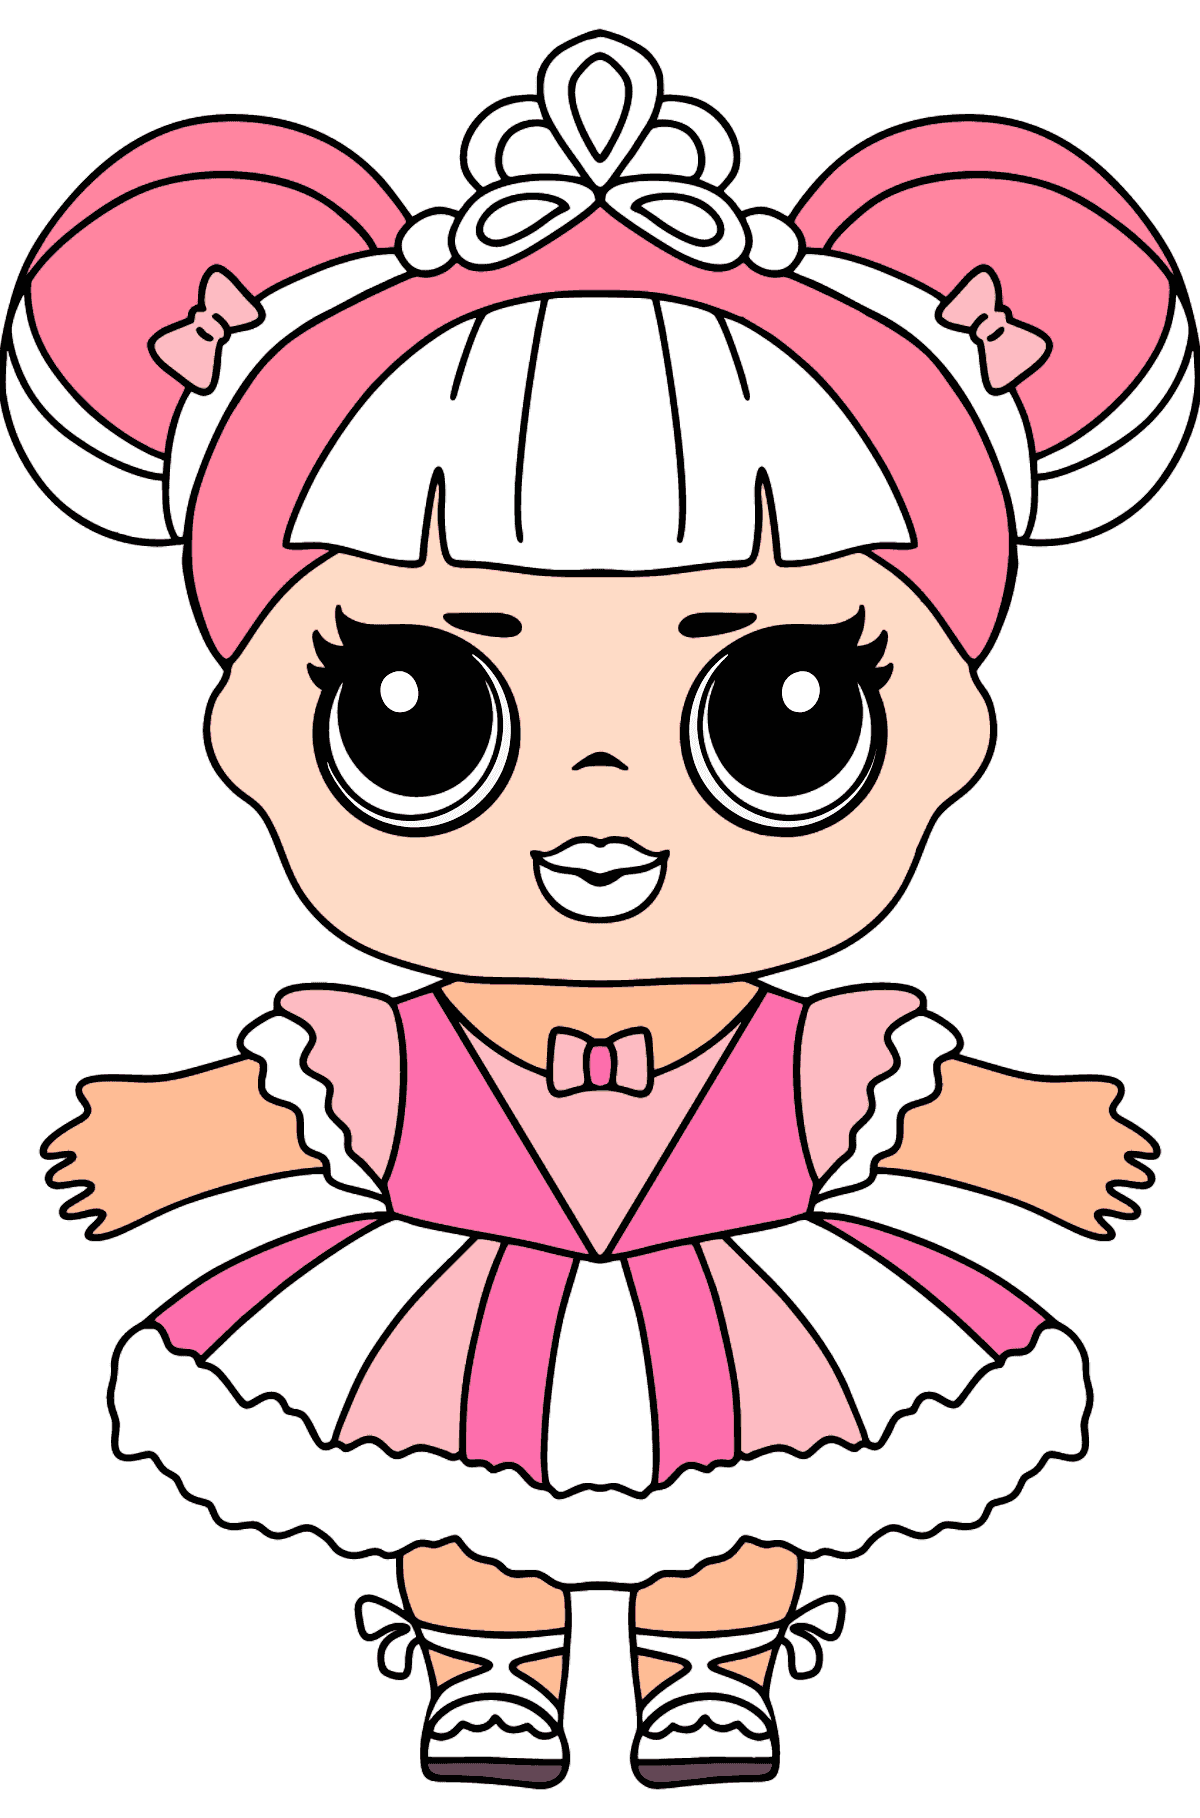 LOL Surprise Doll Center Stage Coloring page - Coloring Pages for Kids